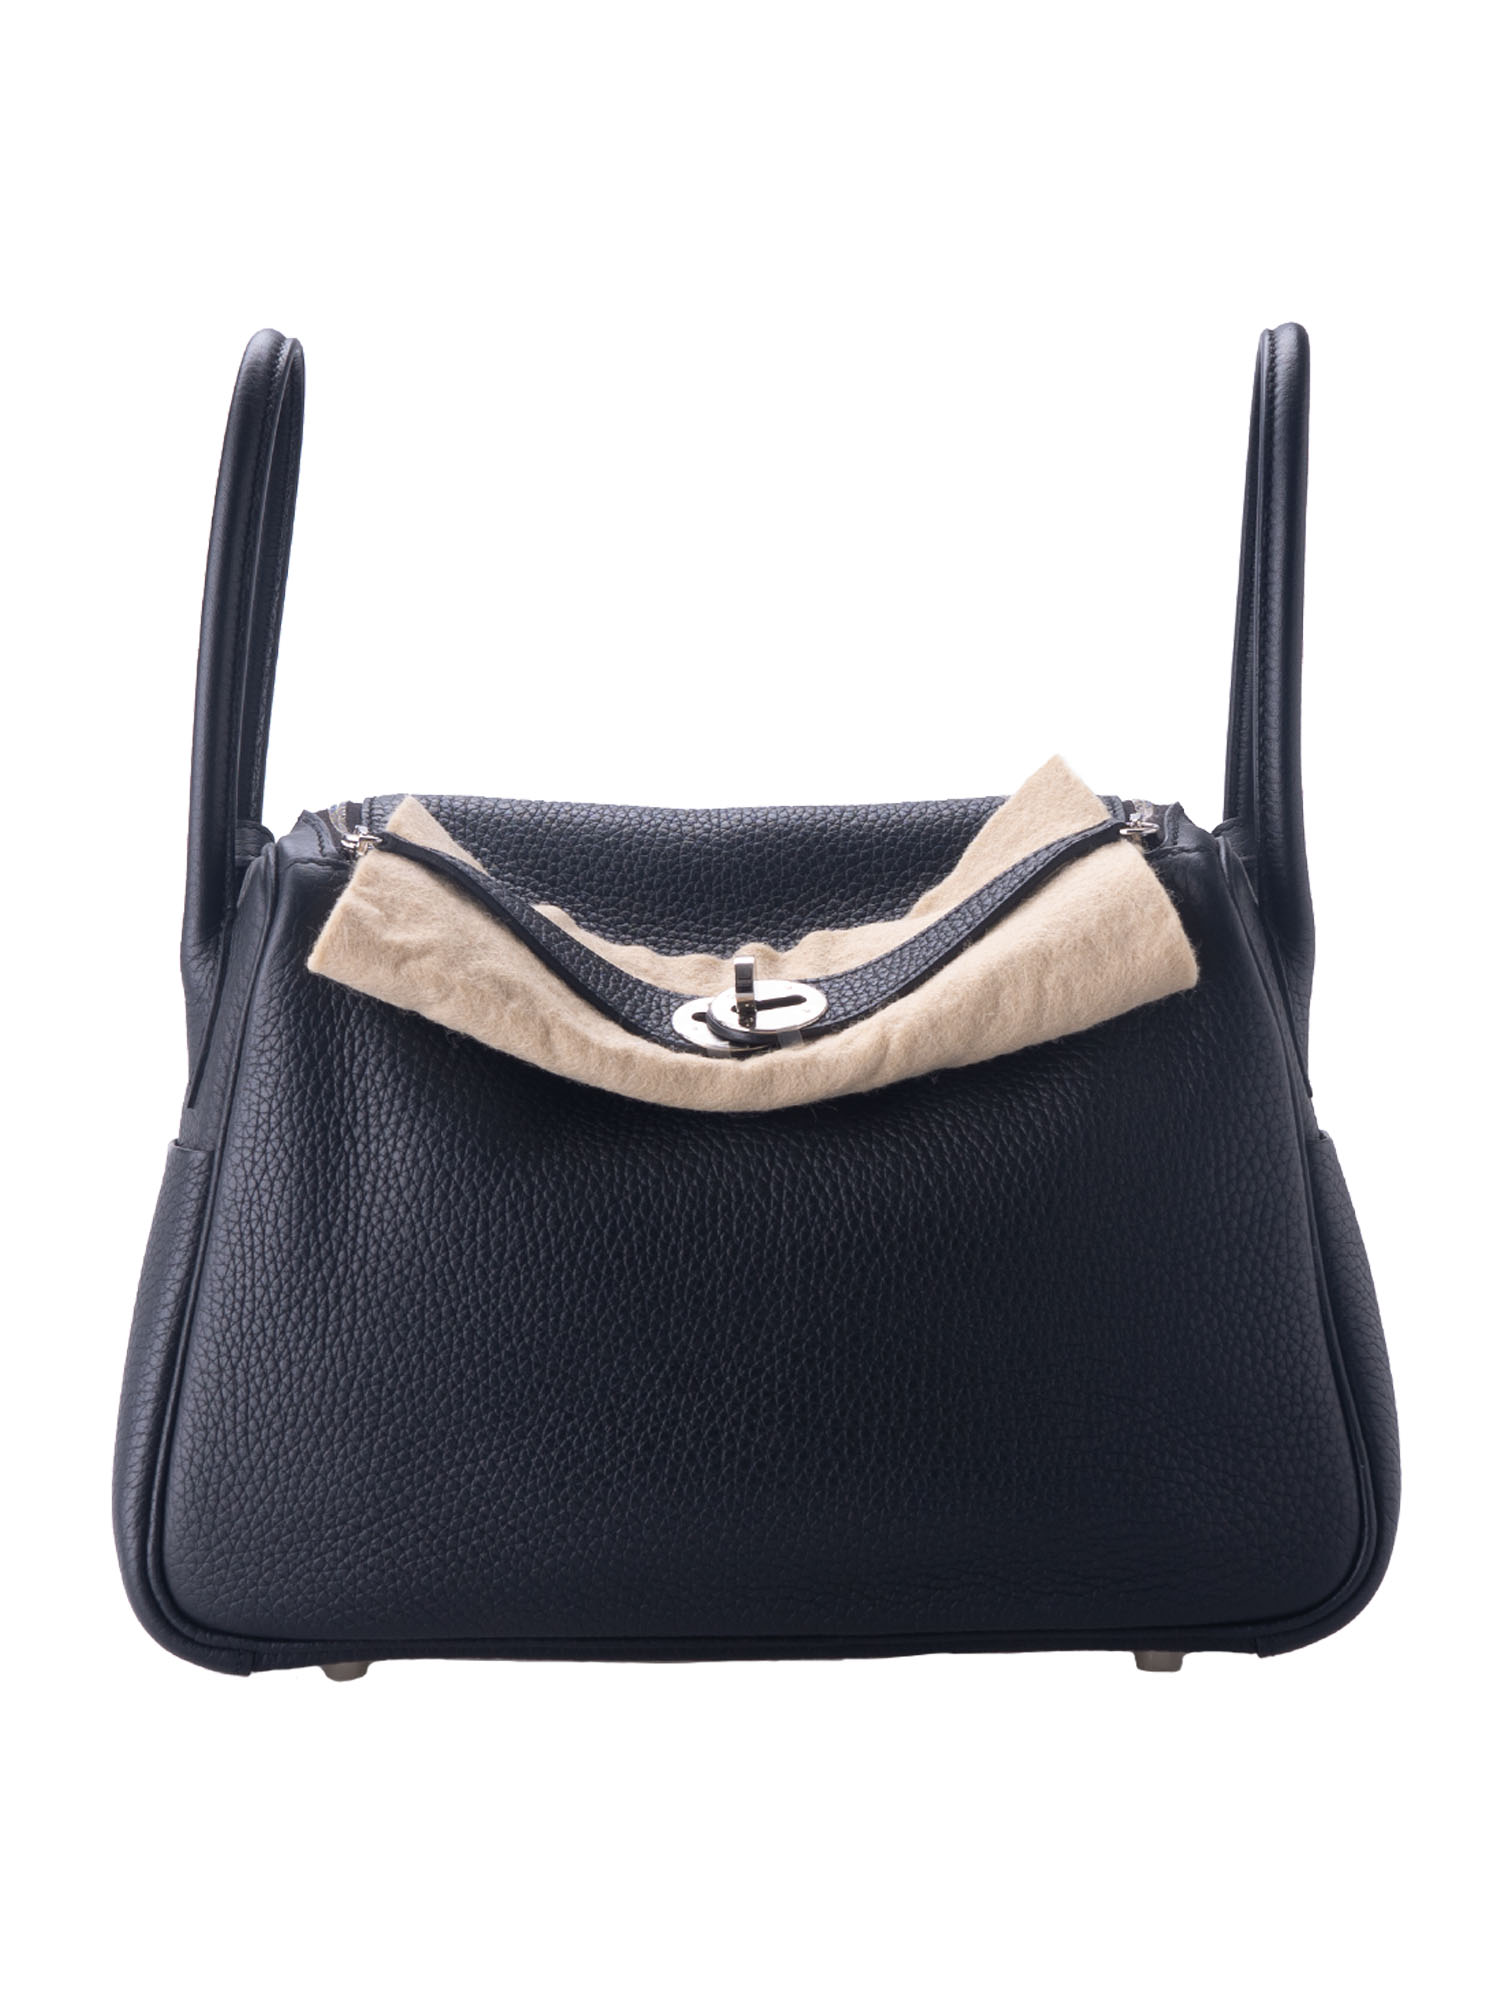 Hermes Lindy 30 Clemence Black SHW - Used Authentic BagArtboard 1